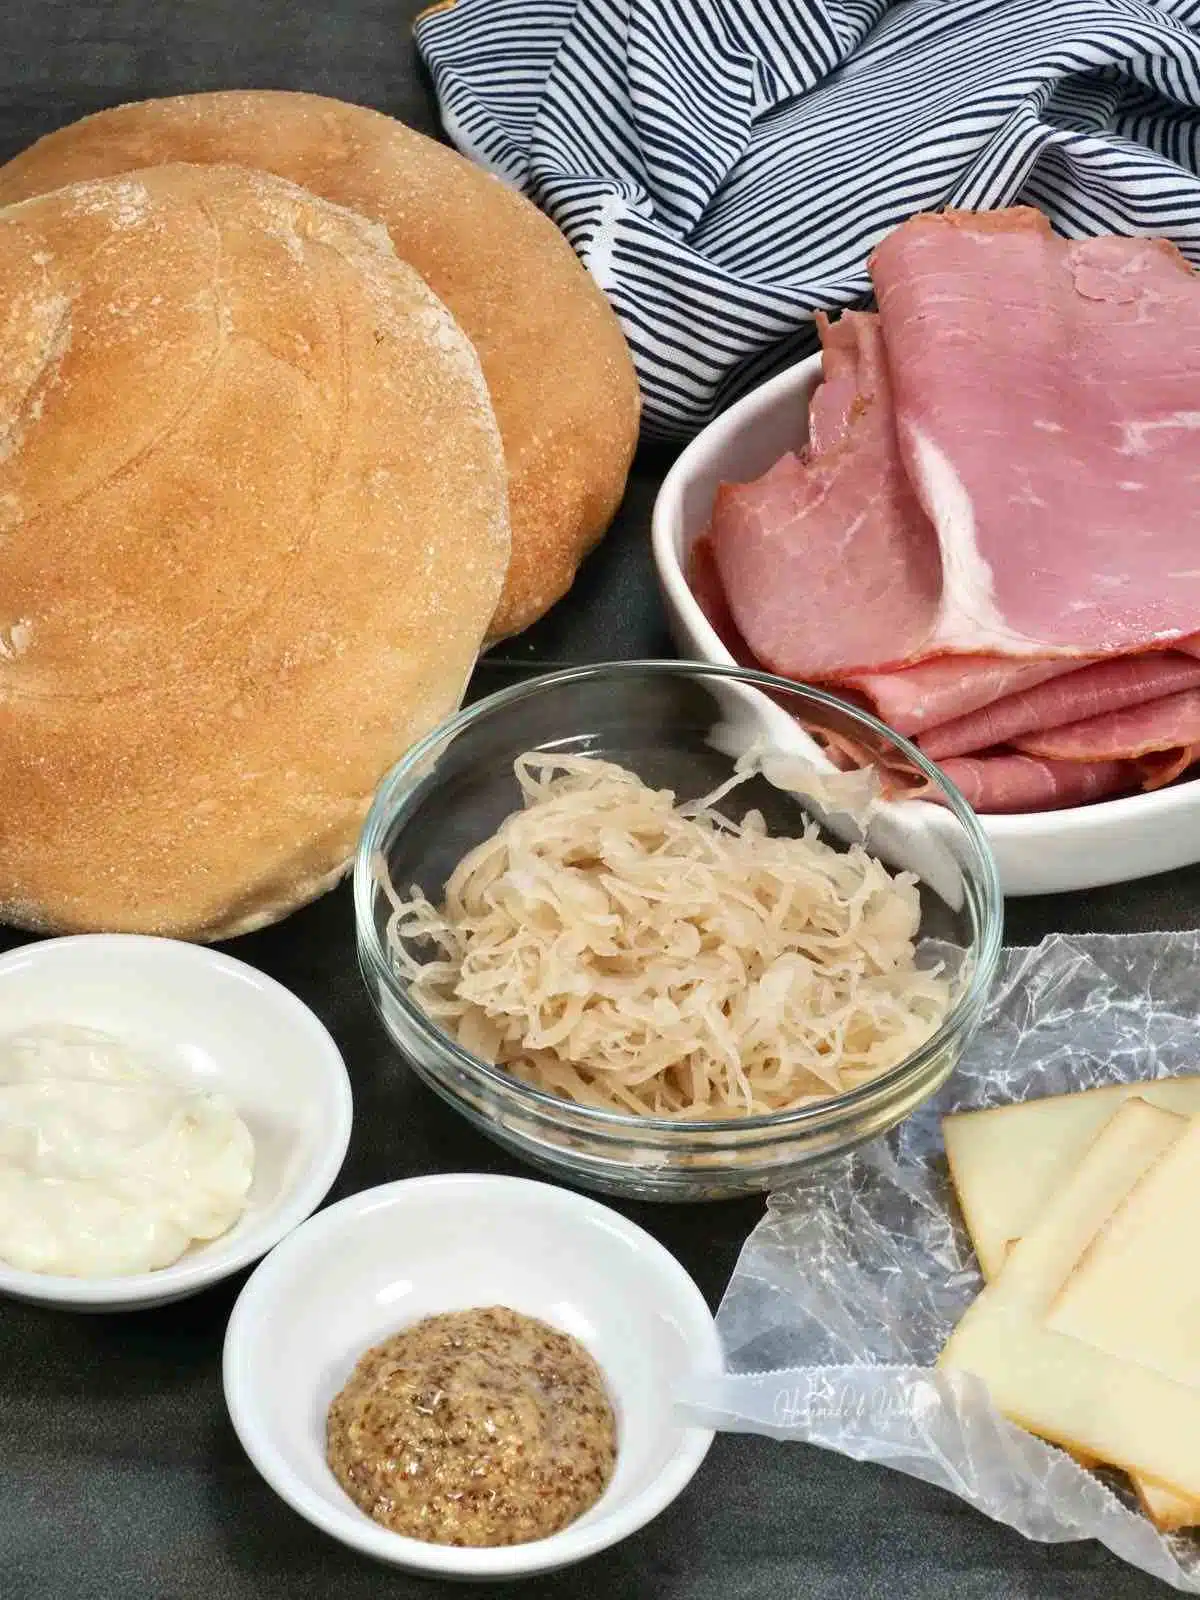 Ingredients needed to make a deli sandwich with corned beef.